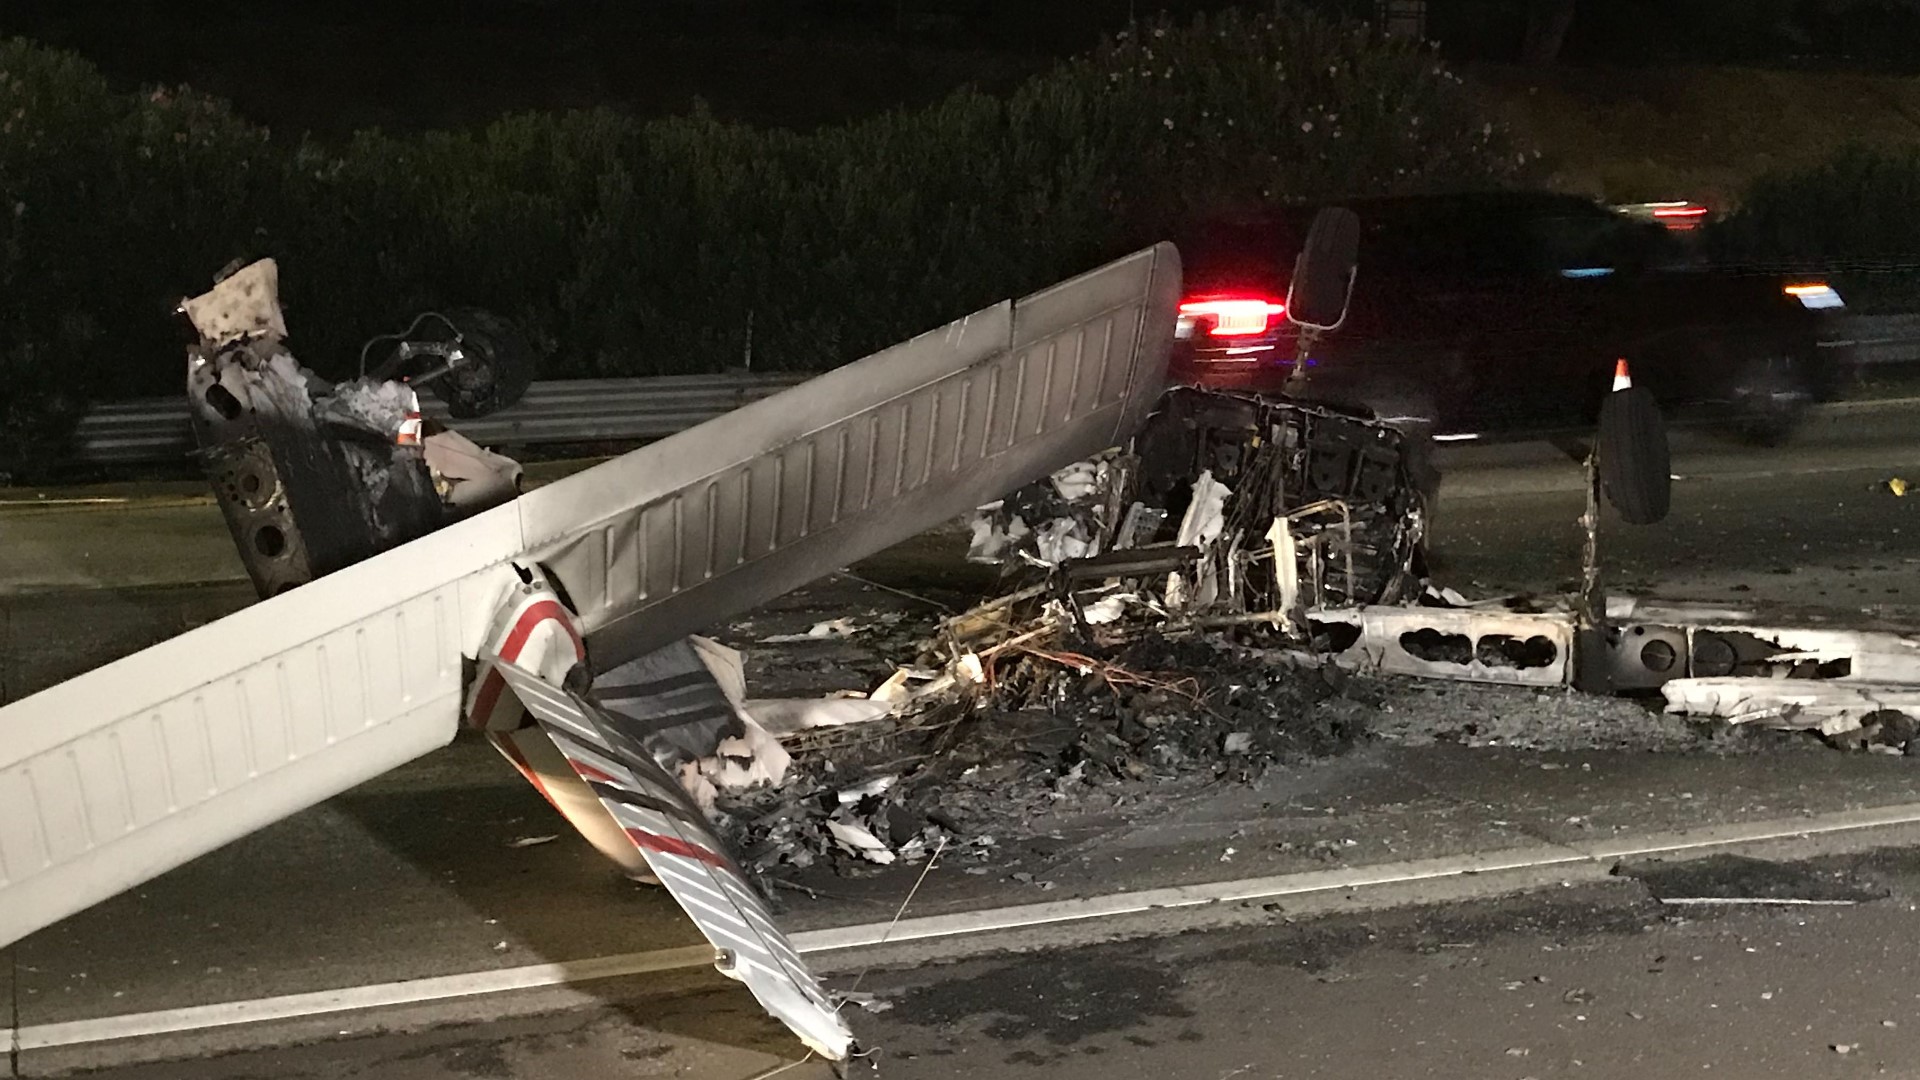 ABC10's Becca Habegger gives a run down on the latest after a plane crashed onto Highway 99 in Modesto.